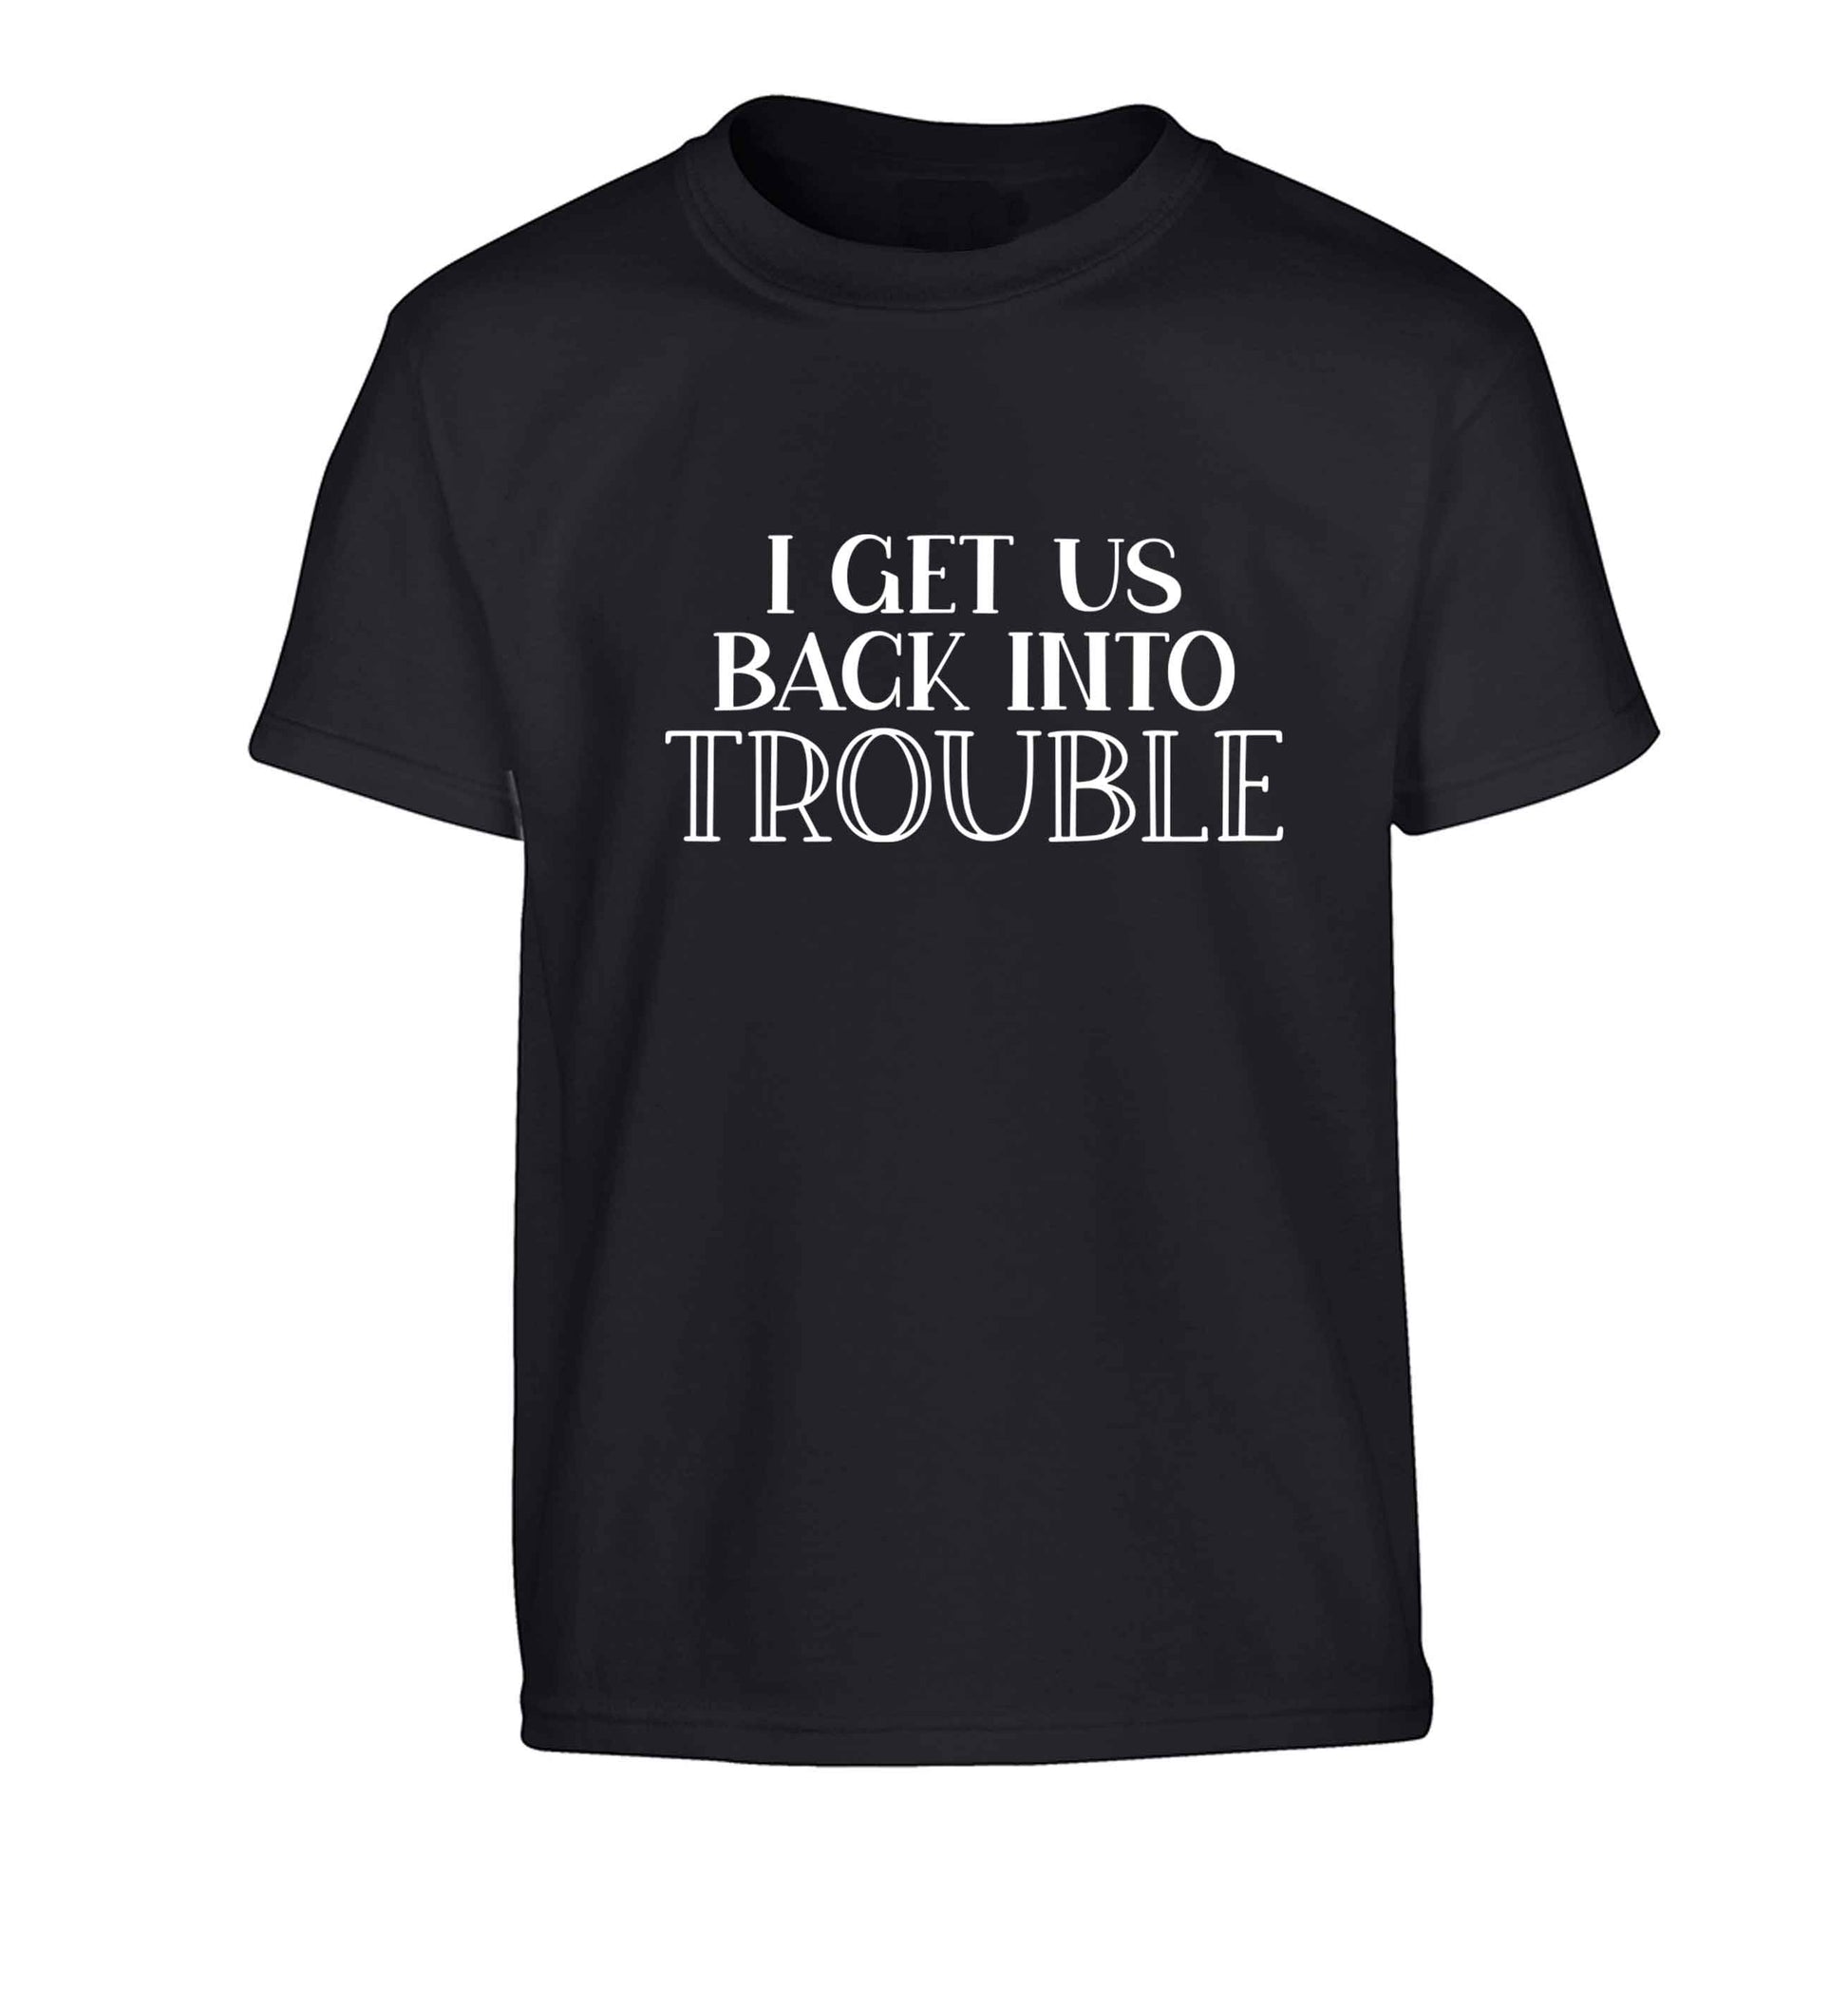 I get us back into trouble Children's black Tshirt 12-13 Years